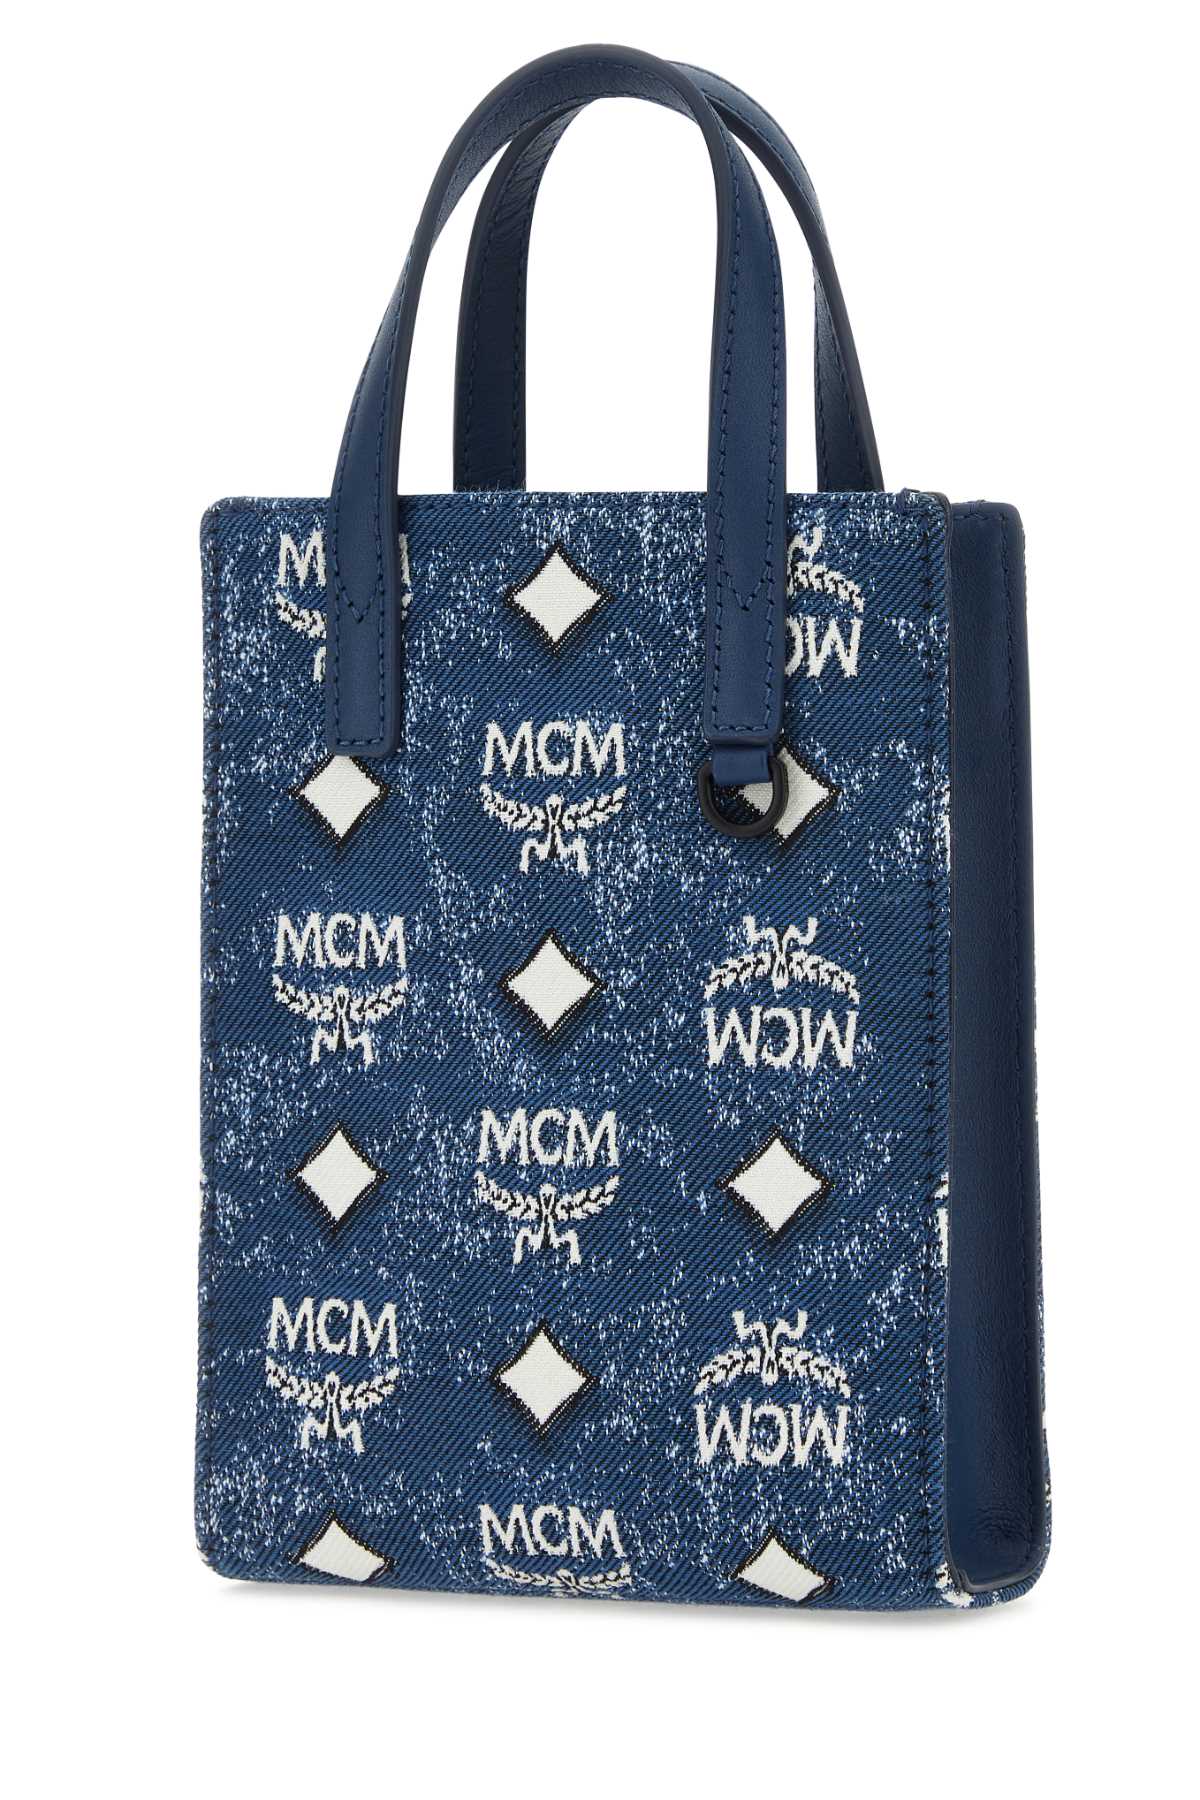 Mcm Embroidered Canvas Aren Handbag In Le